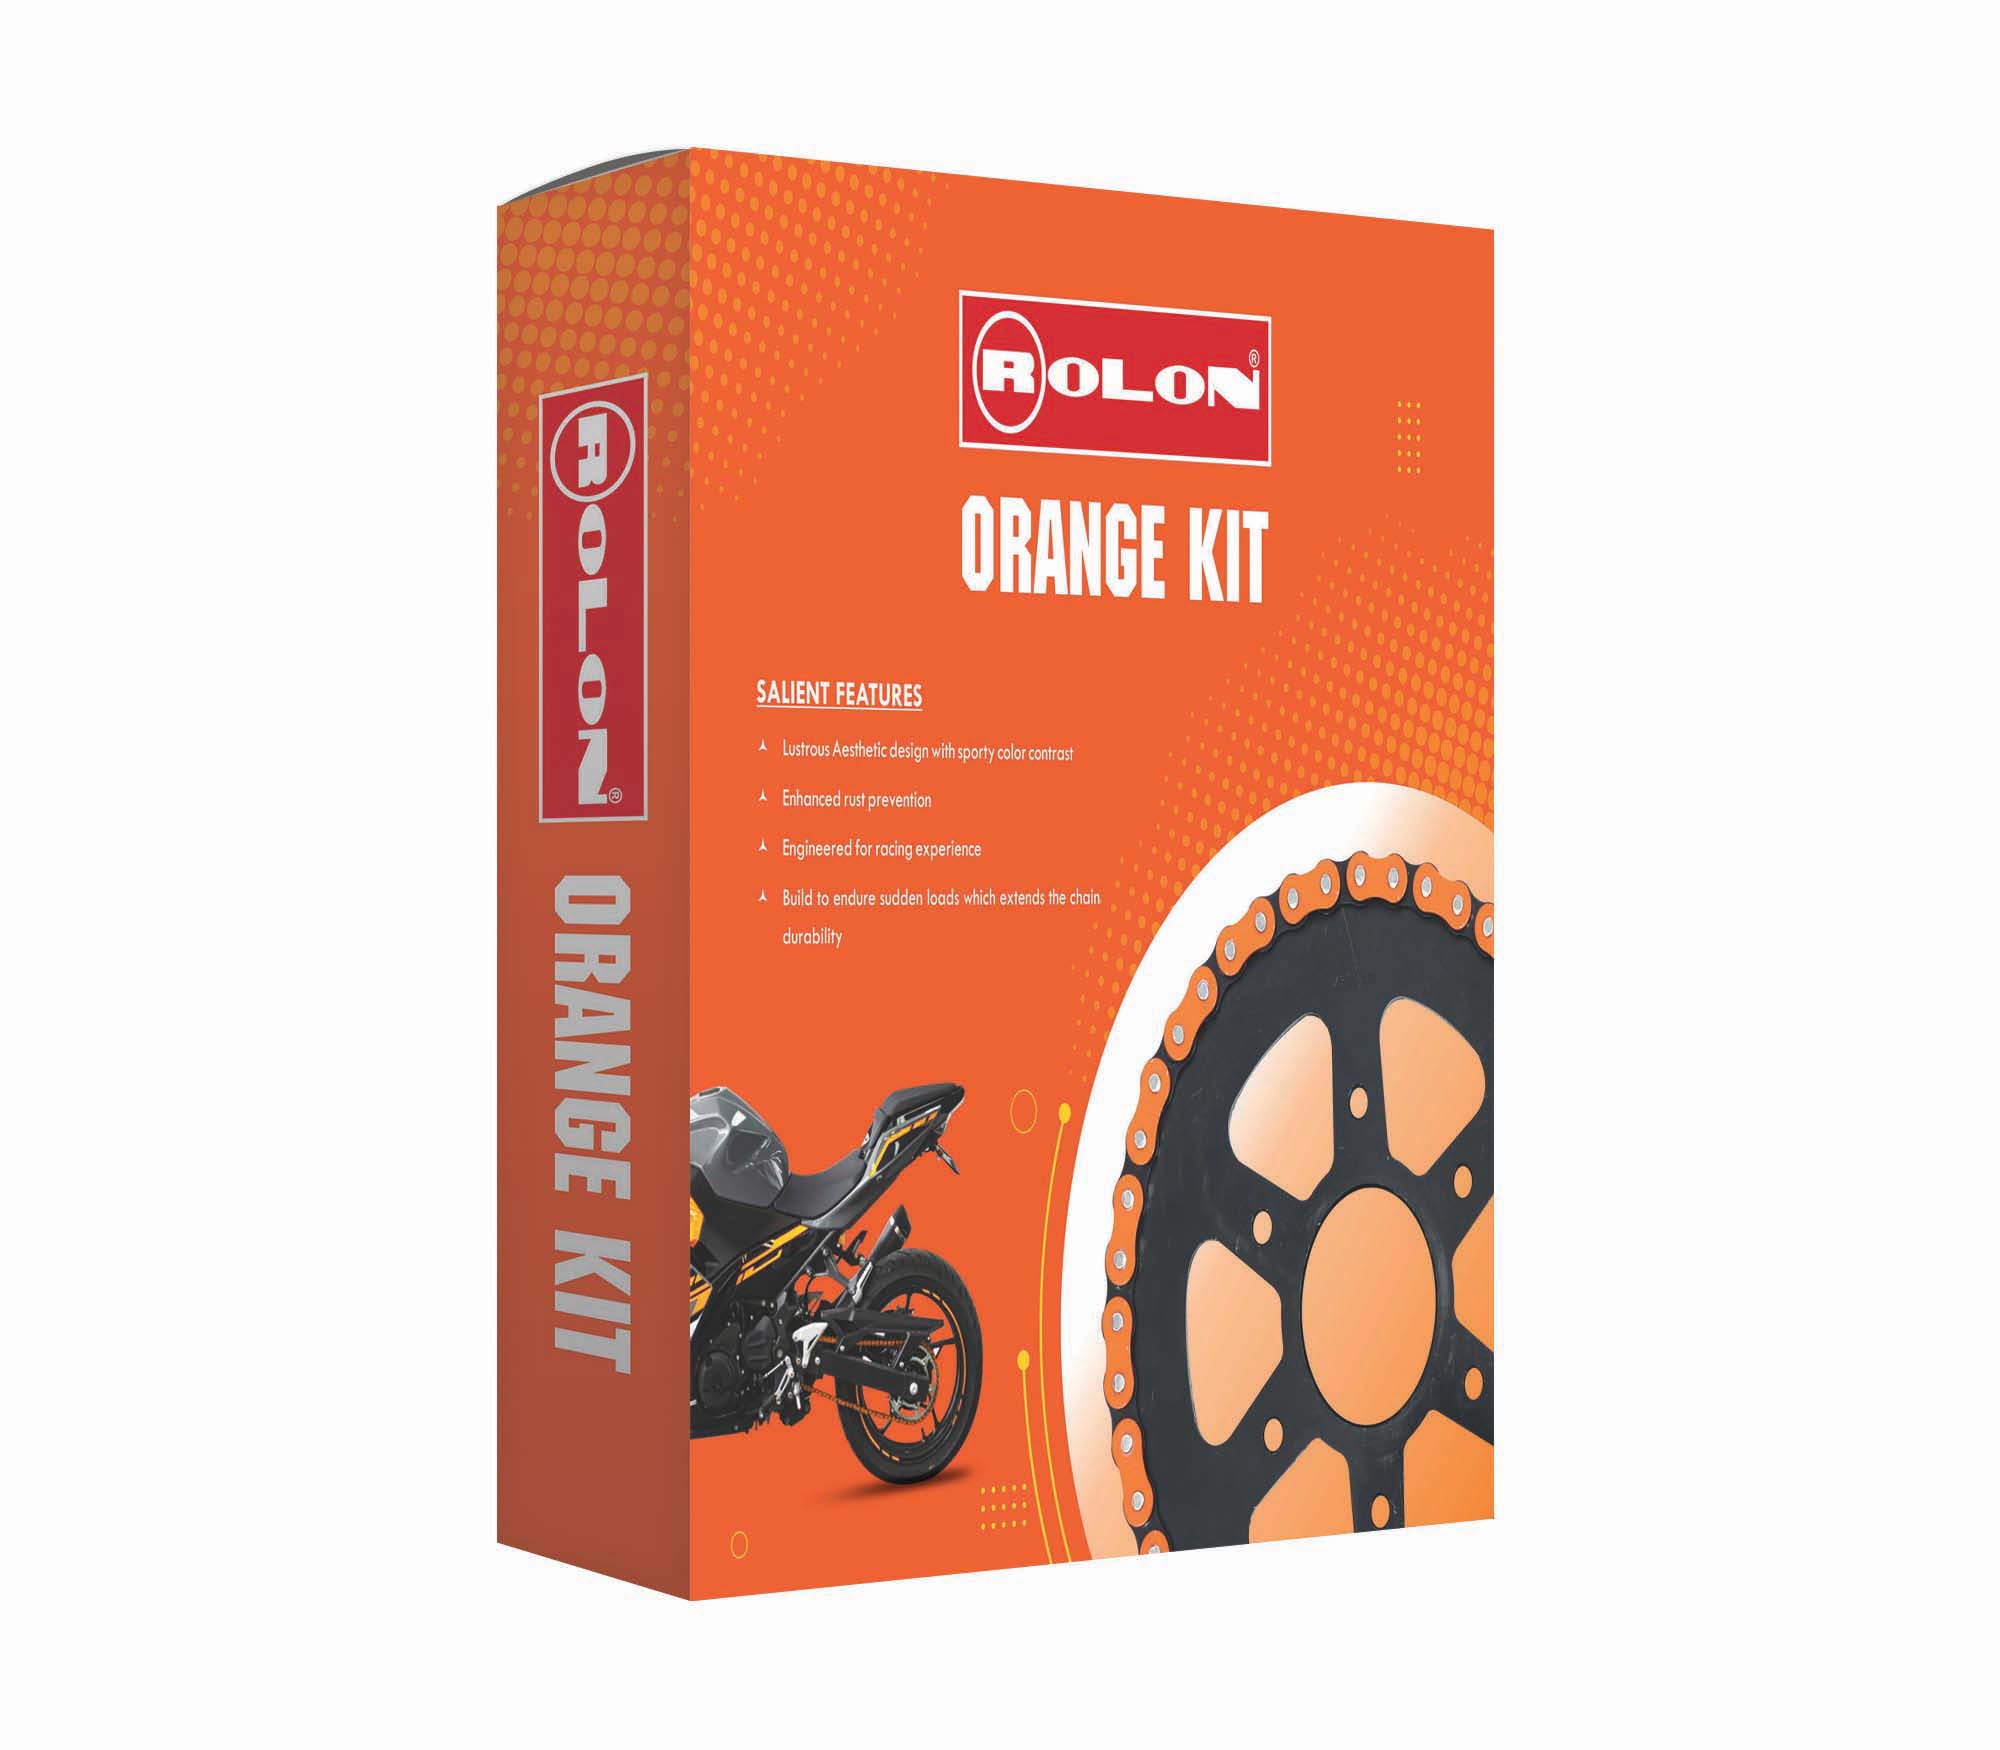 Orange Chain and Sprocket kit for PULSAR RS 200 - KIT HPORO 377NF